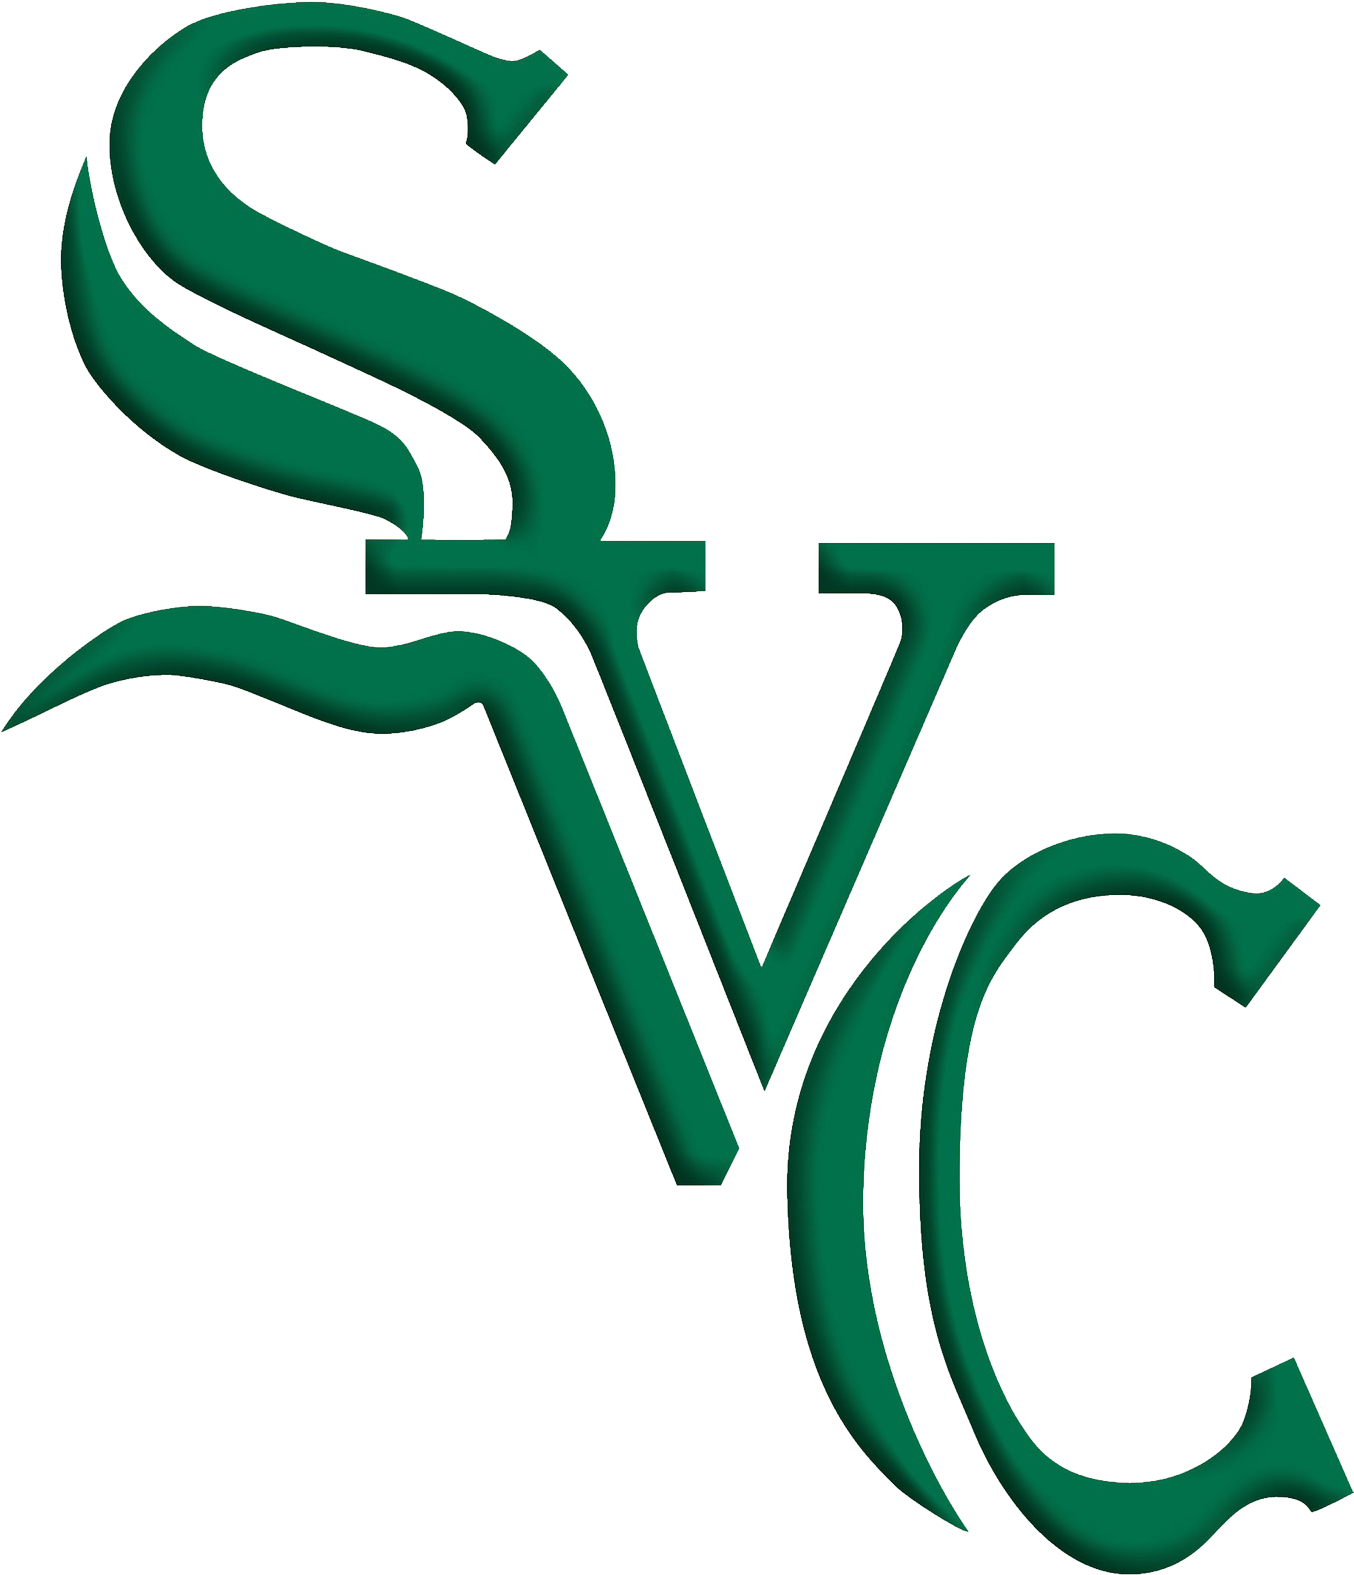 Monday, September 21, 2015 - Southern Vermont College Logo (1353x1595)